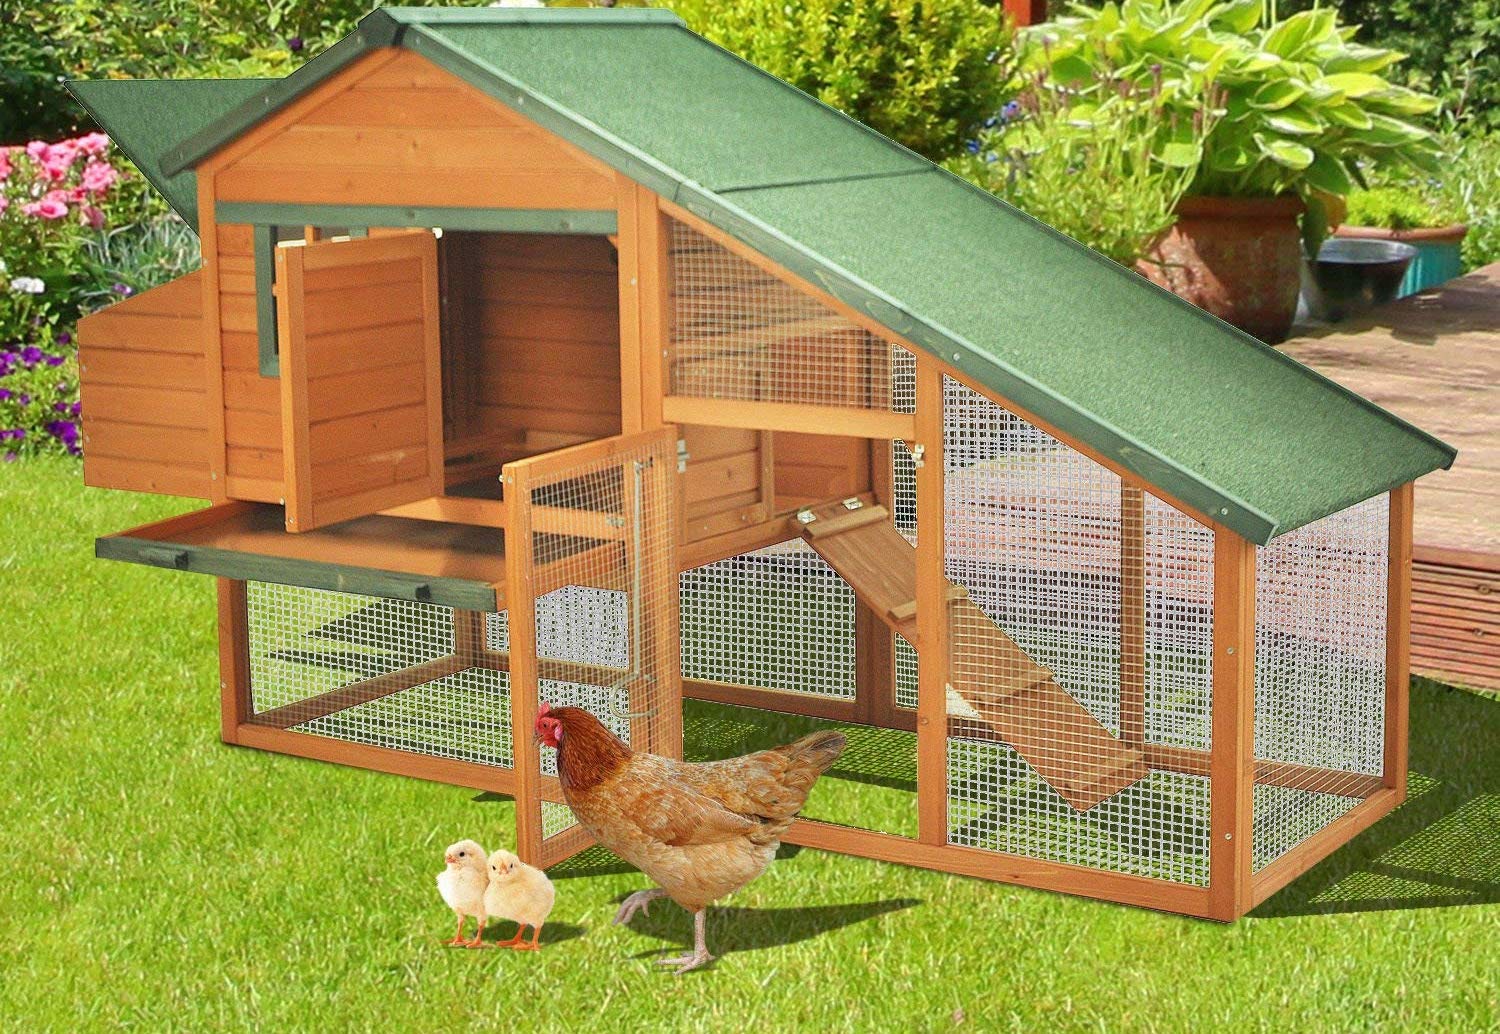 Chicken Coop Lighting: Why You Need One?